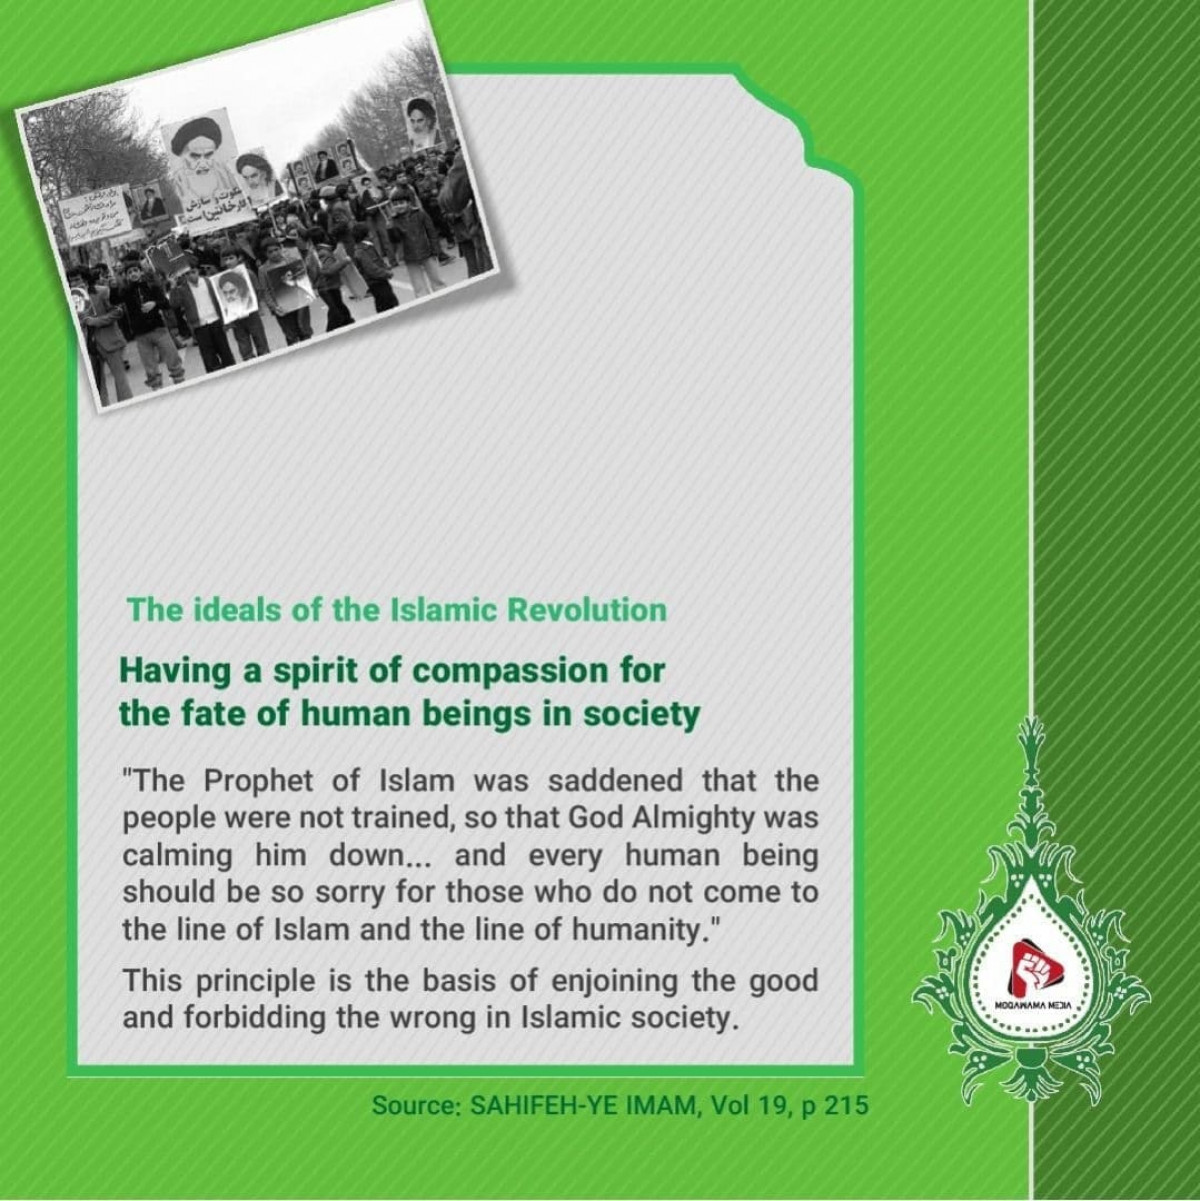 The ideals of the Islamic Revolution3